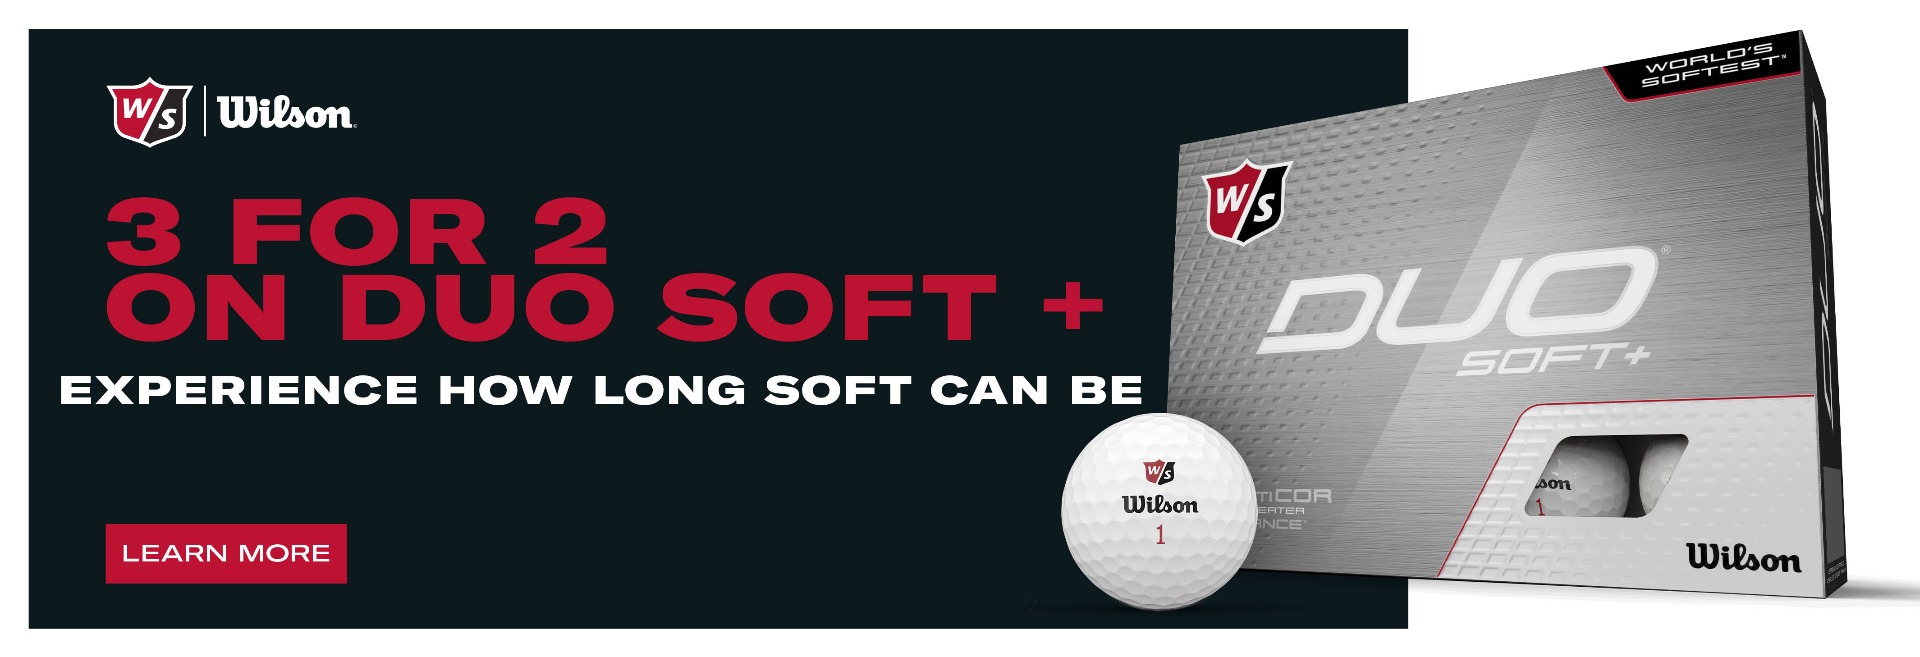 Wilson Staff Duo Golf Balls 3 for 2 Offer Now On